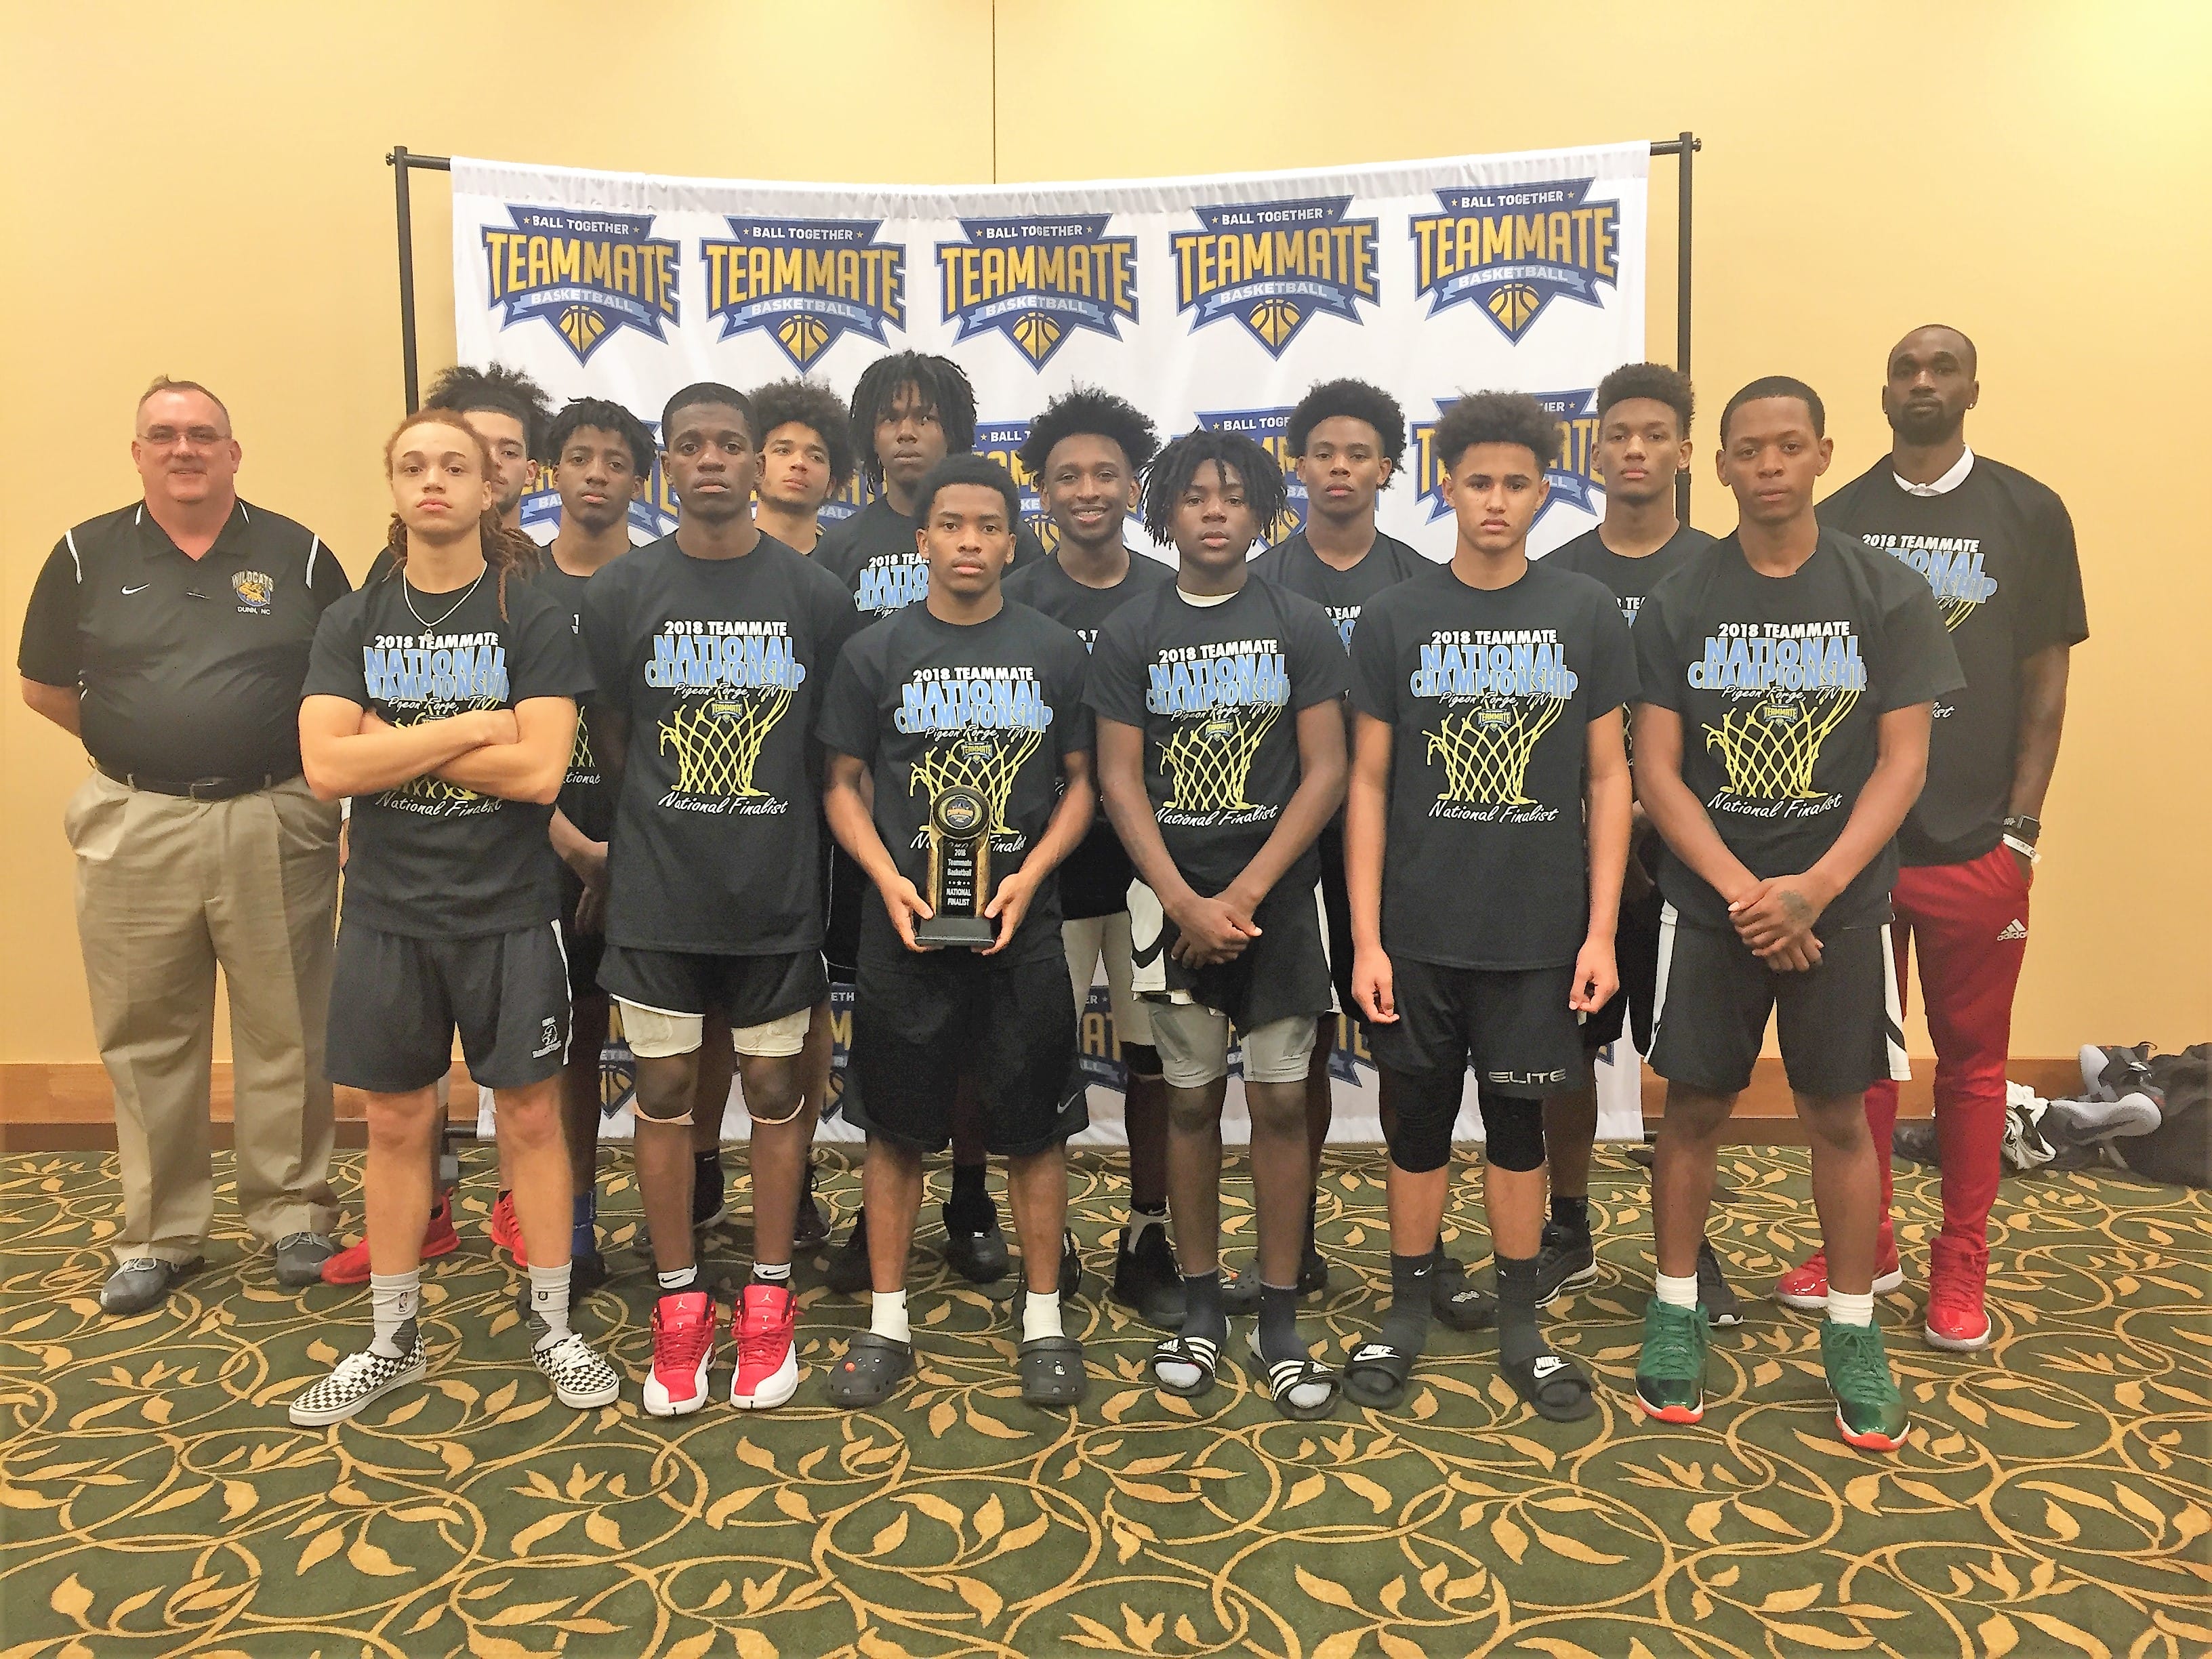 Dunn PAL Wildcats second in Tennessee tournament